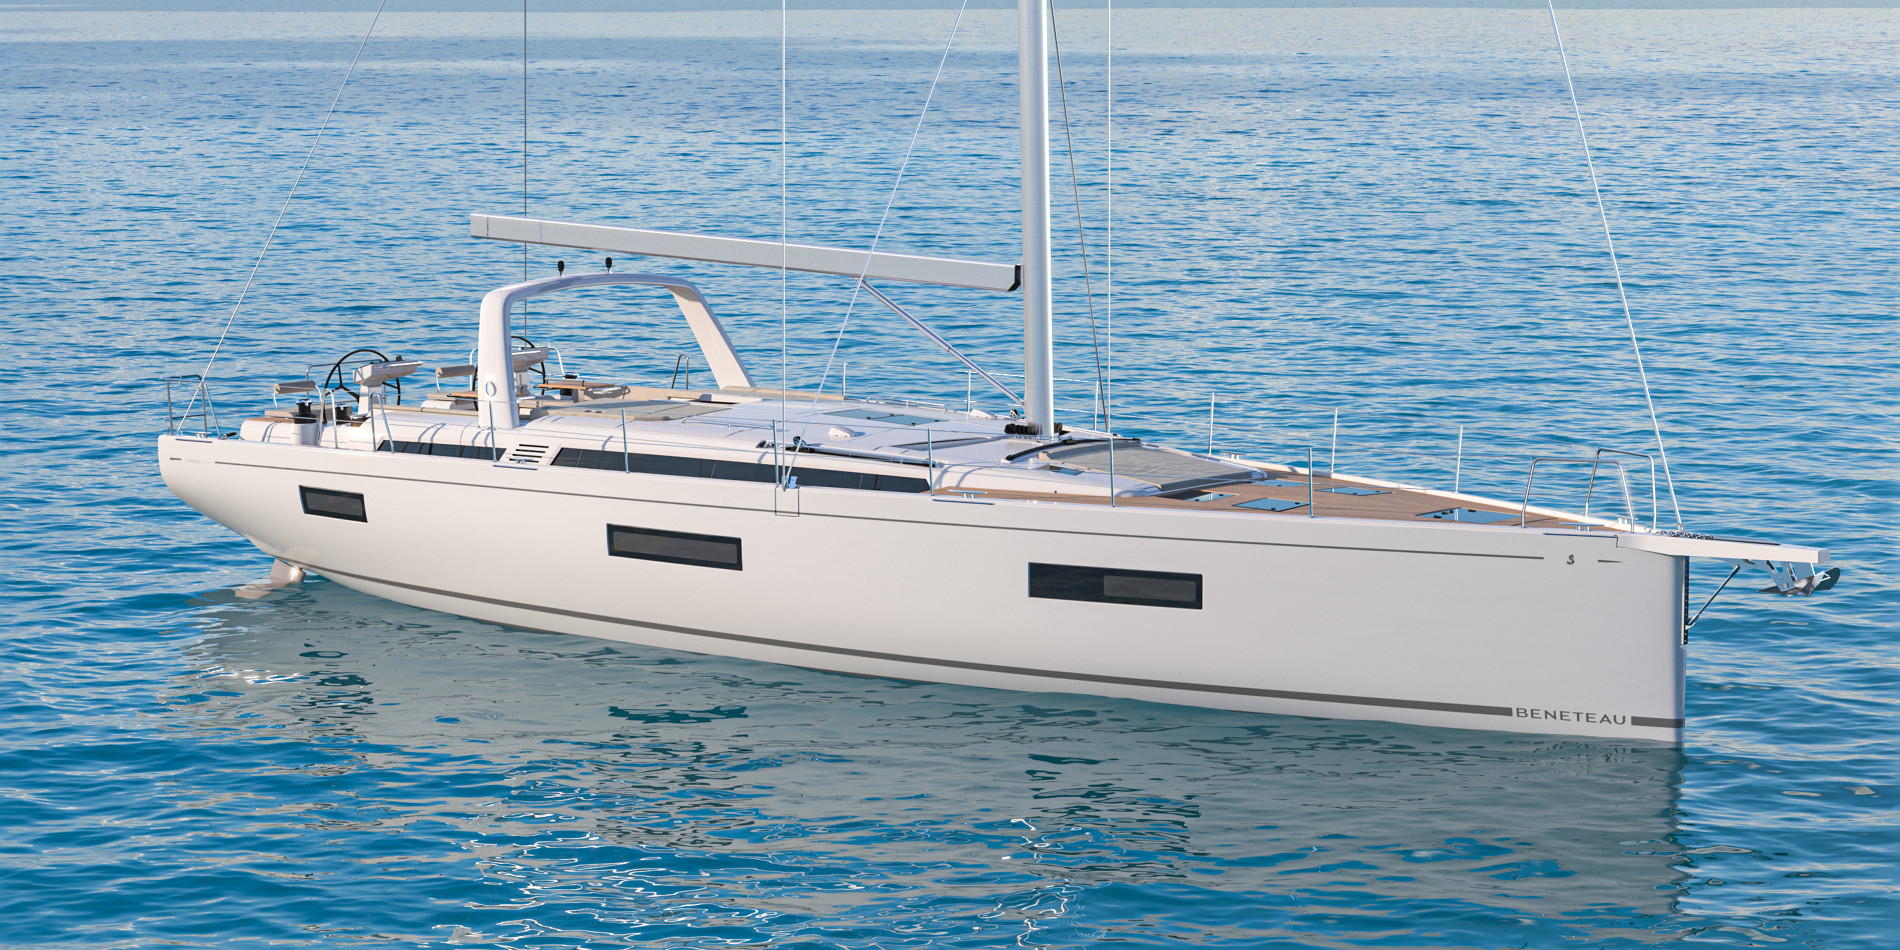 Introducing the all new Beneteau Oceanis Yacht 60